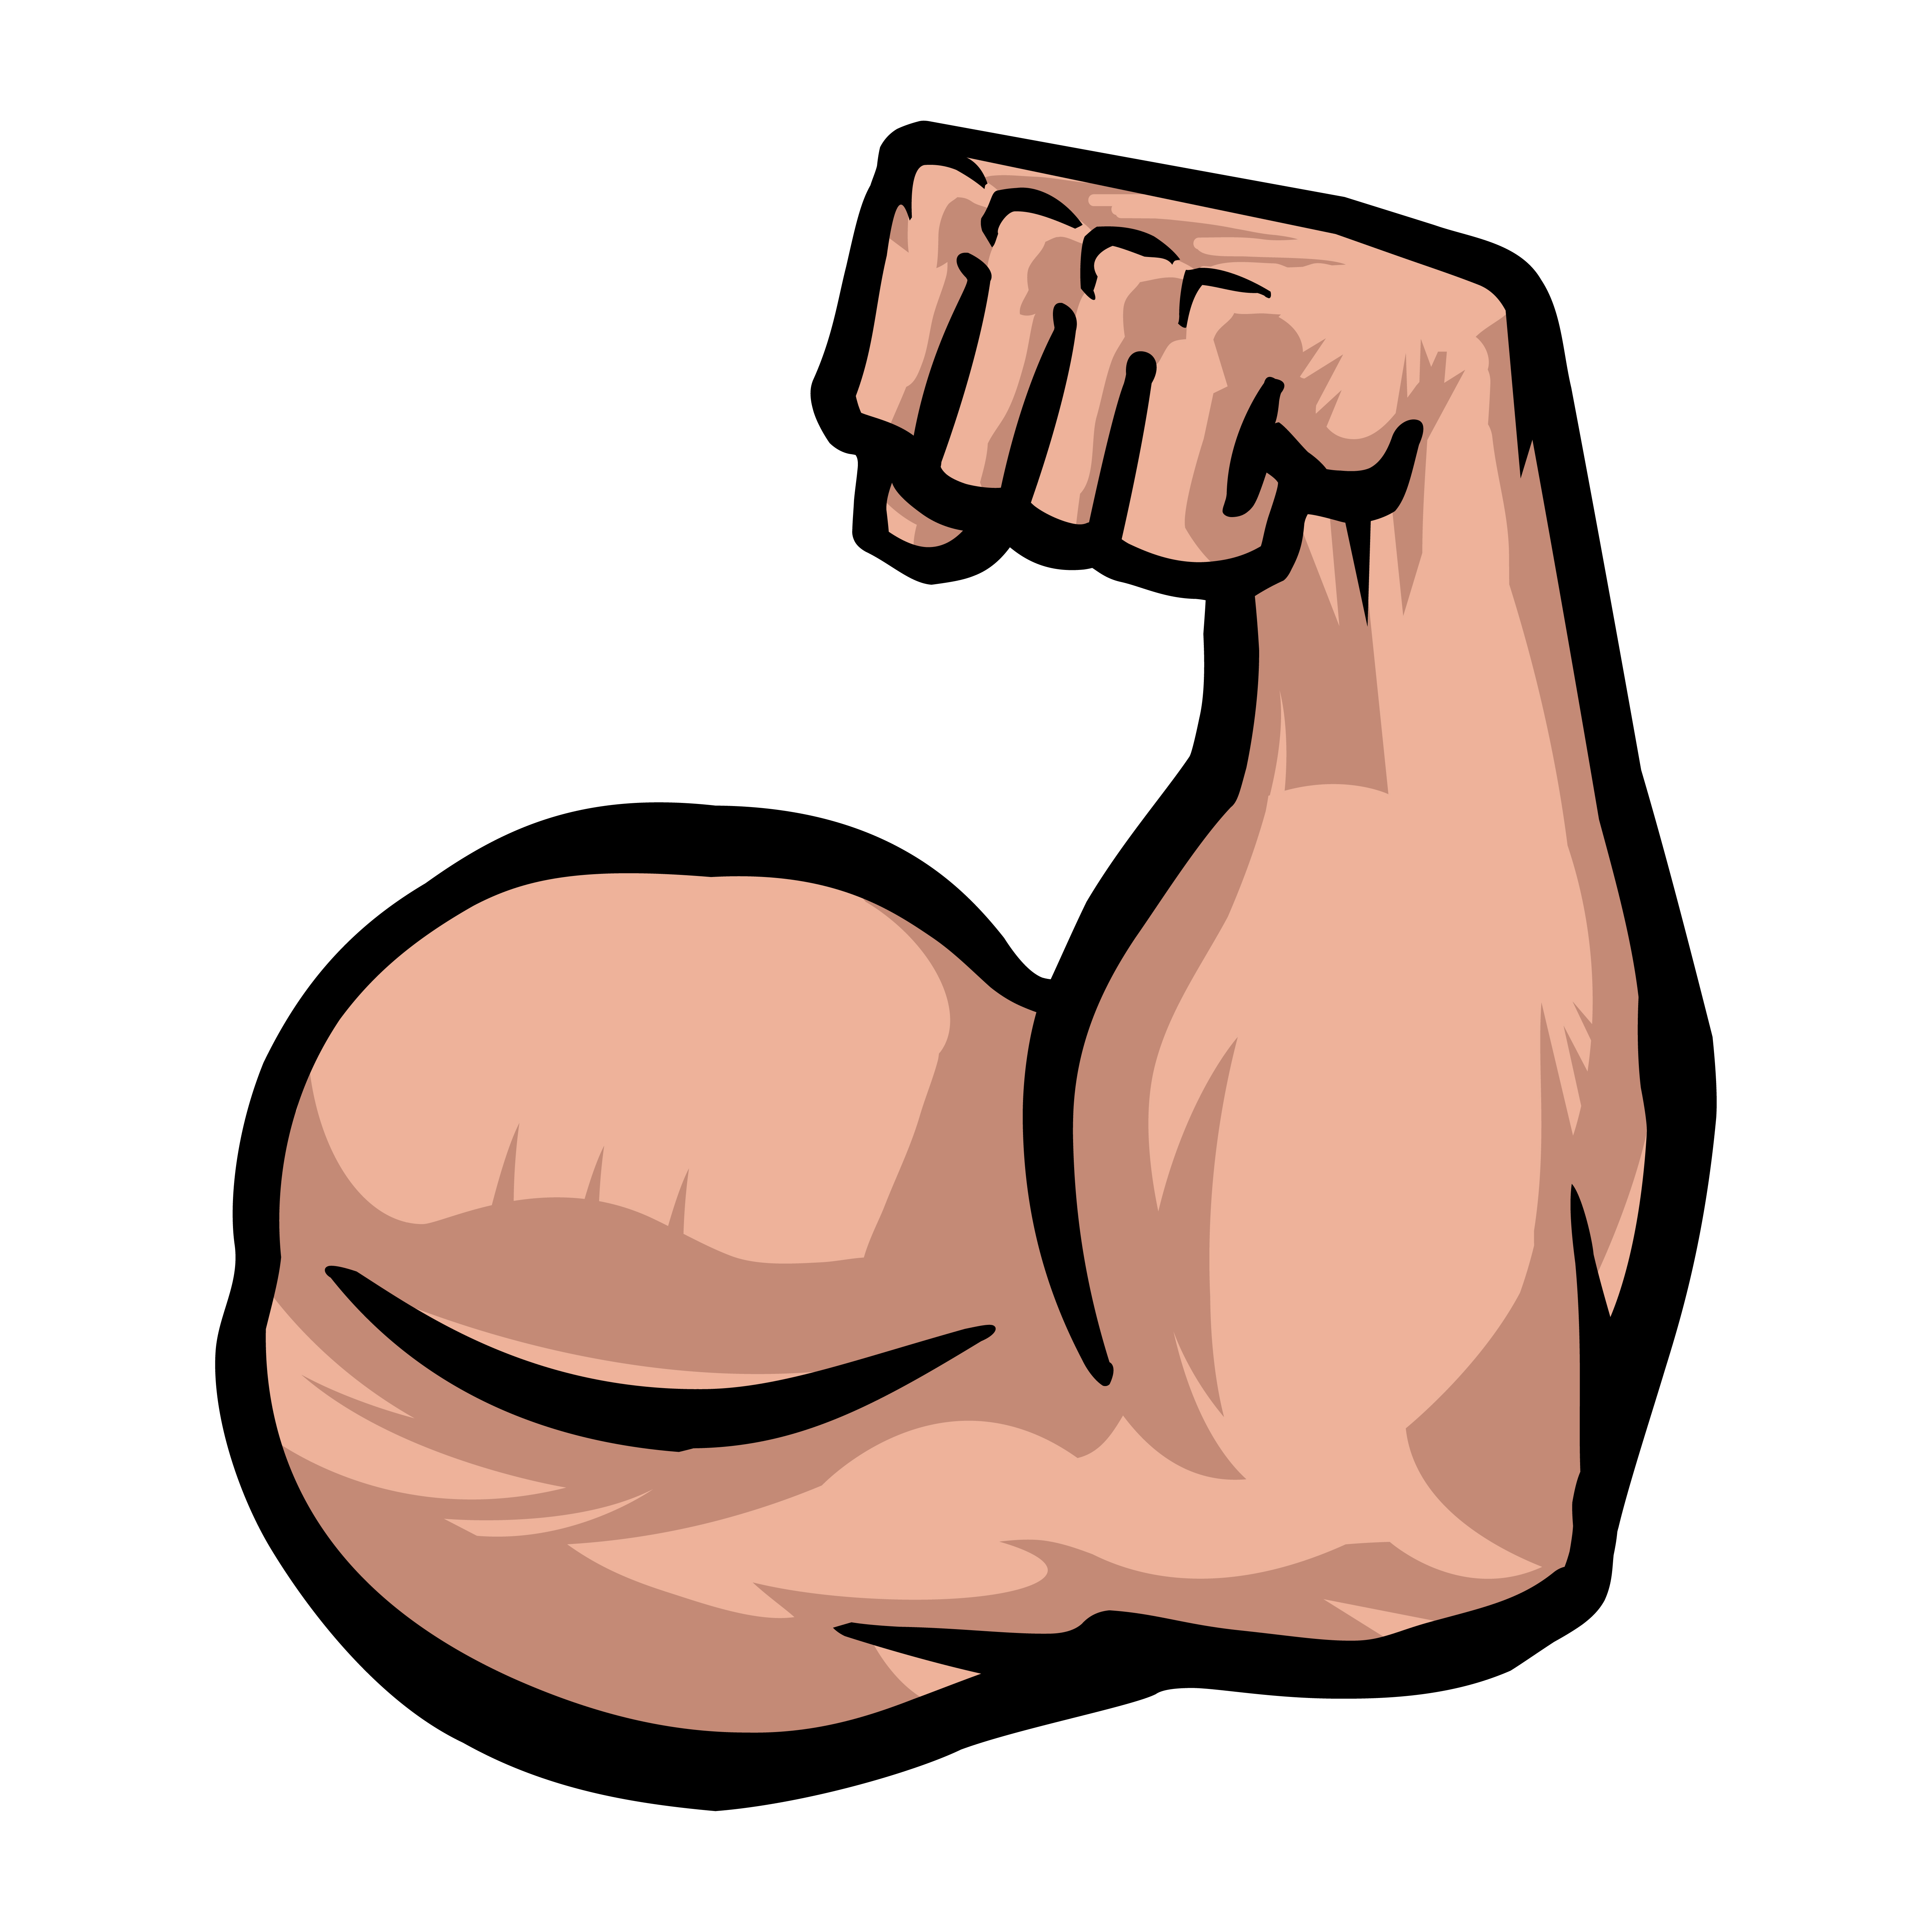 Muscular Arm Vector Art, Icons, and Graphics for Free Download